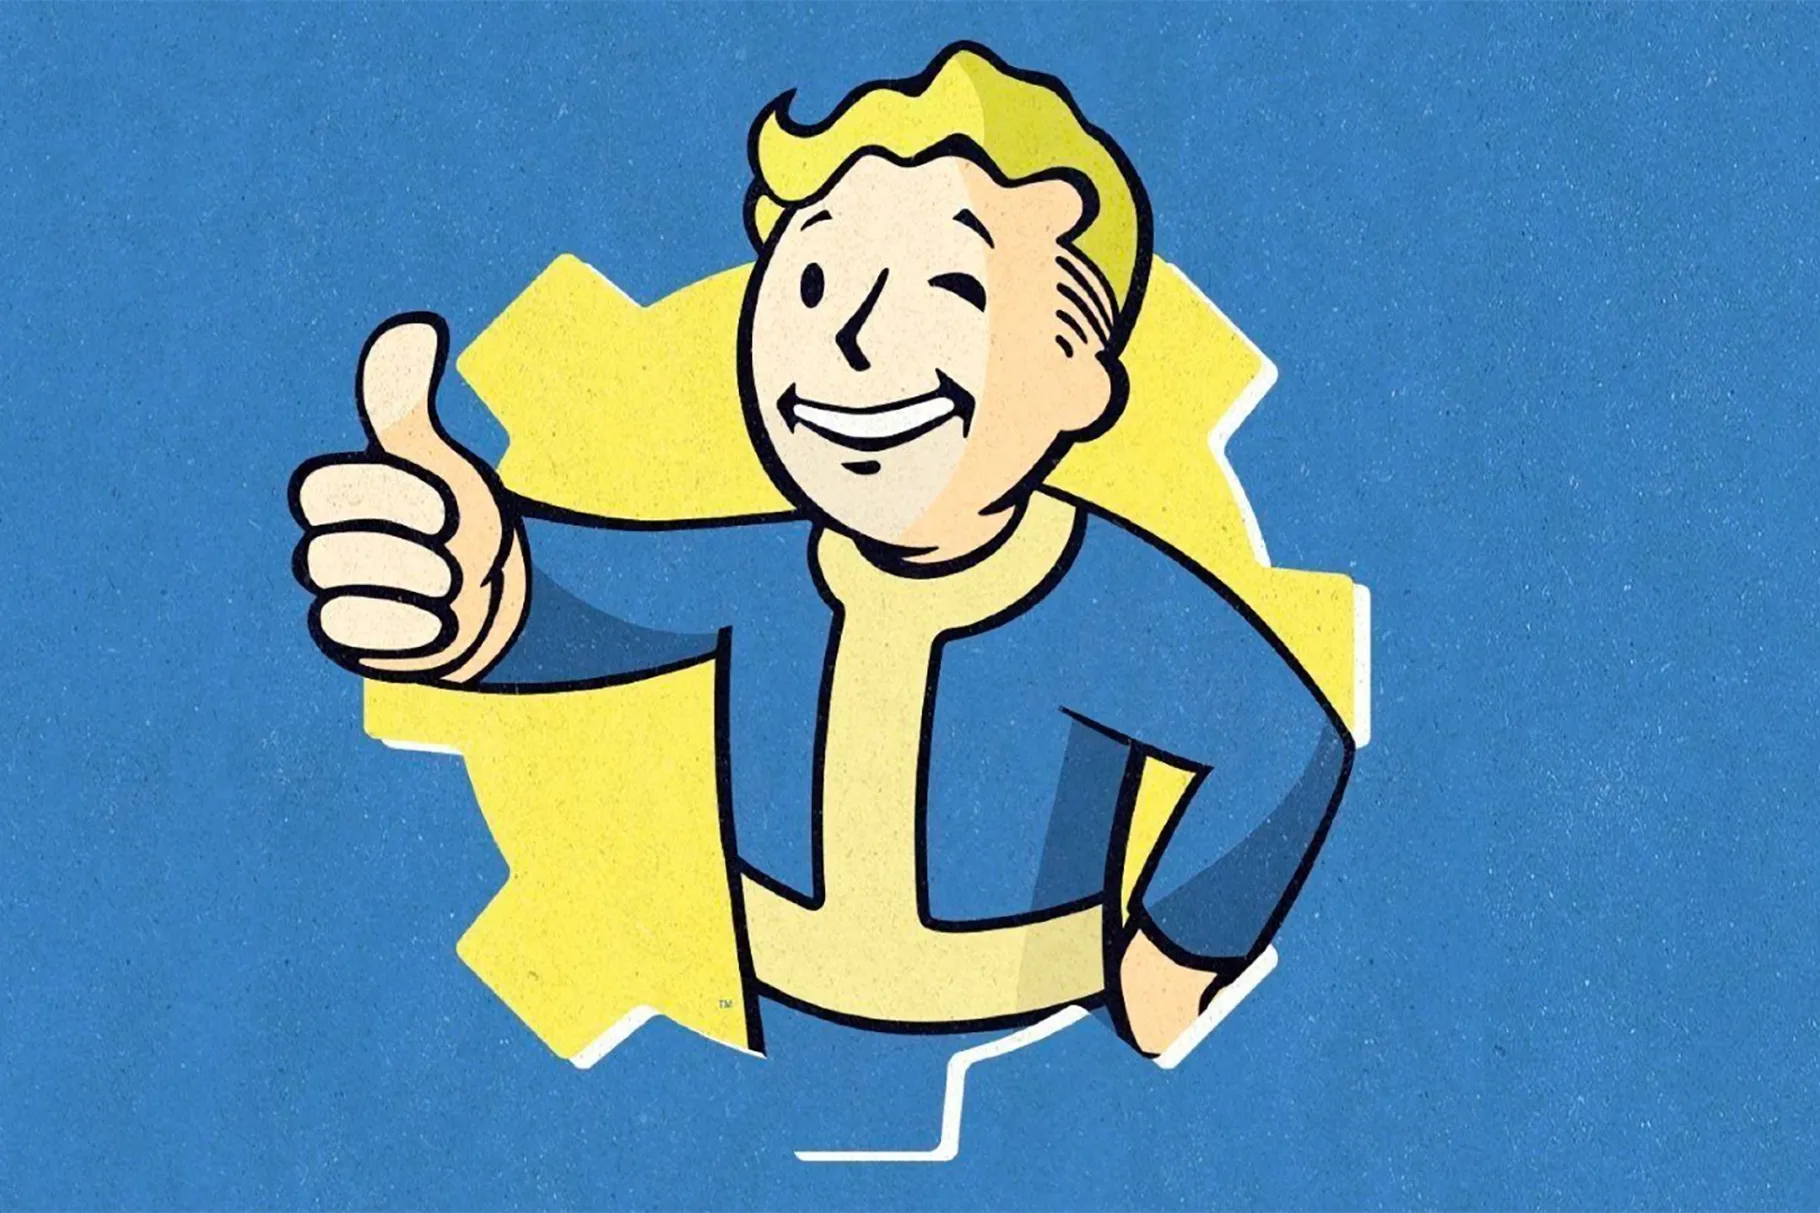 Vault Boy, the mascot from Fallout